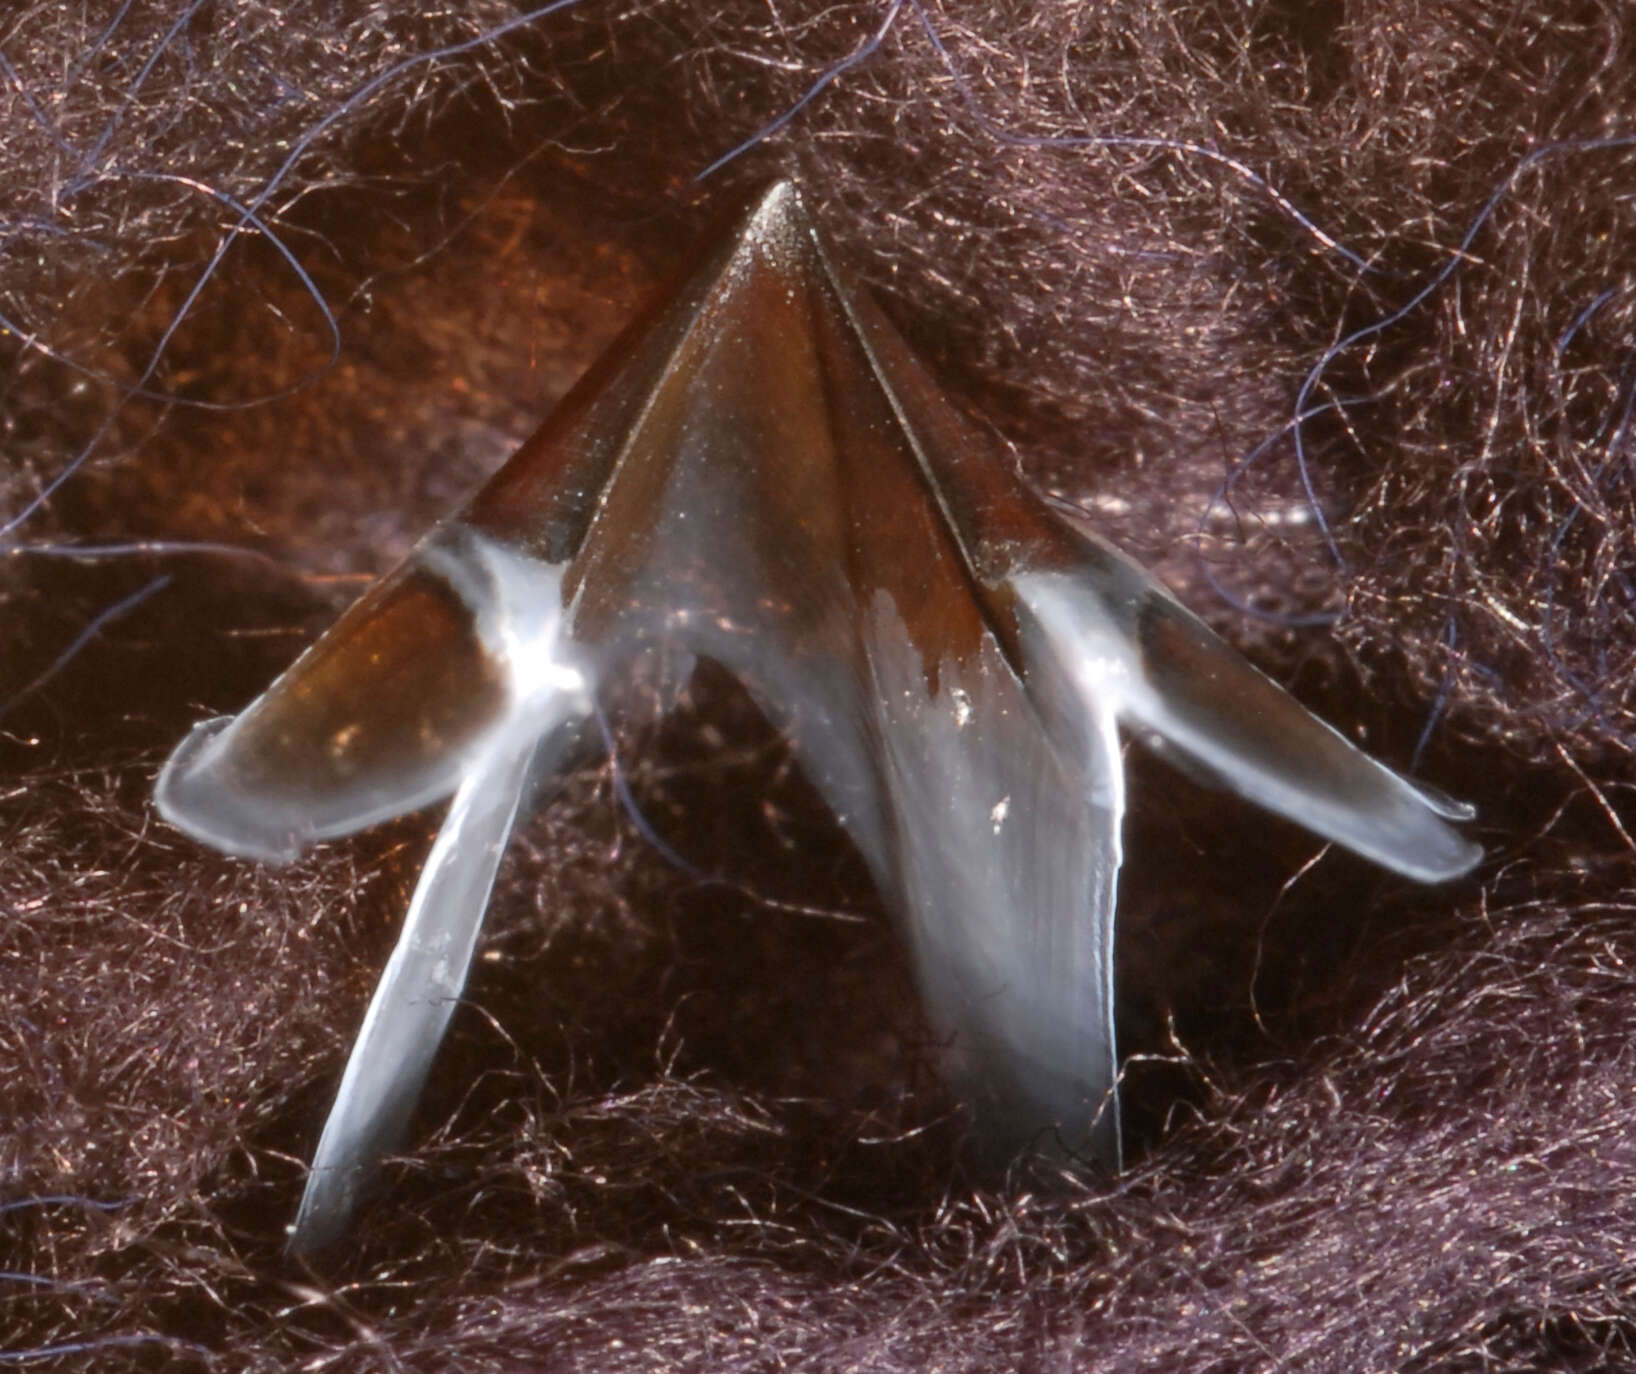 Image of Narrowteuthis nesisi Young & Vecchione 2005